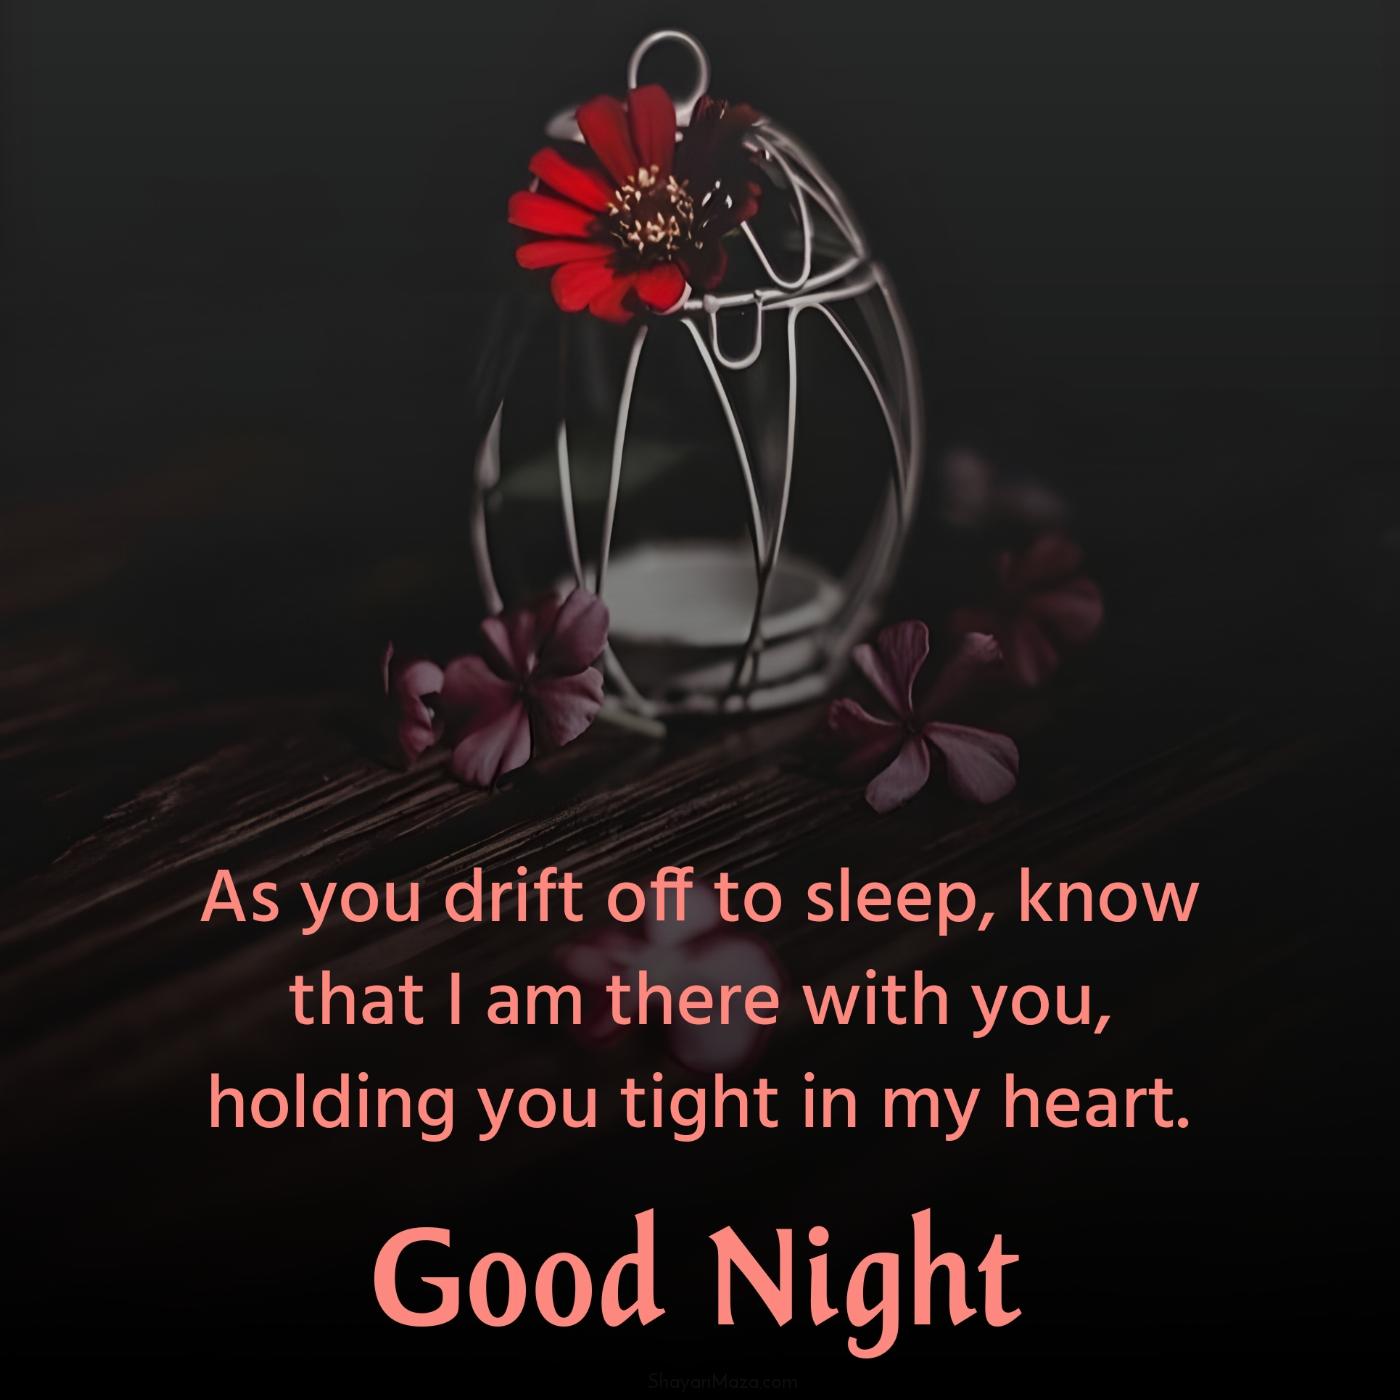 As you drift off to sleep know that I am there with you